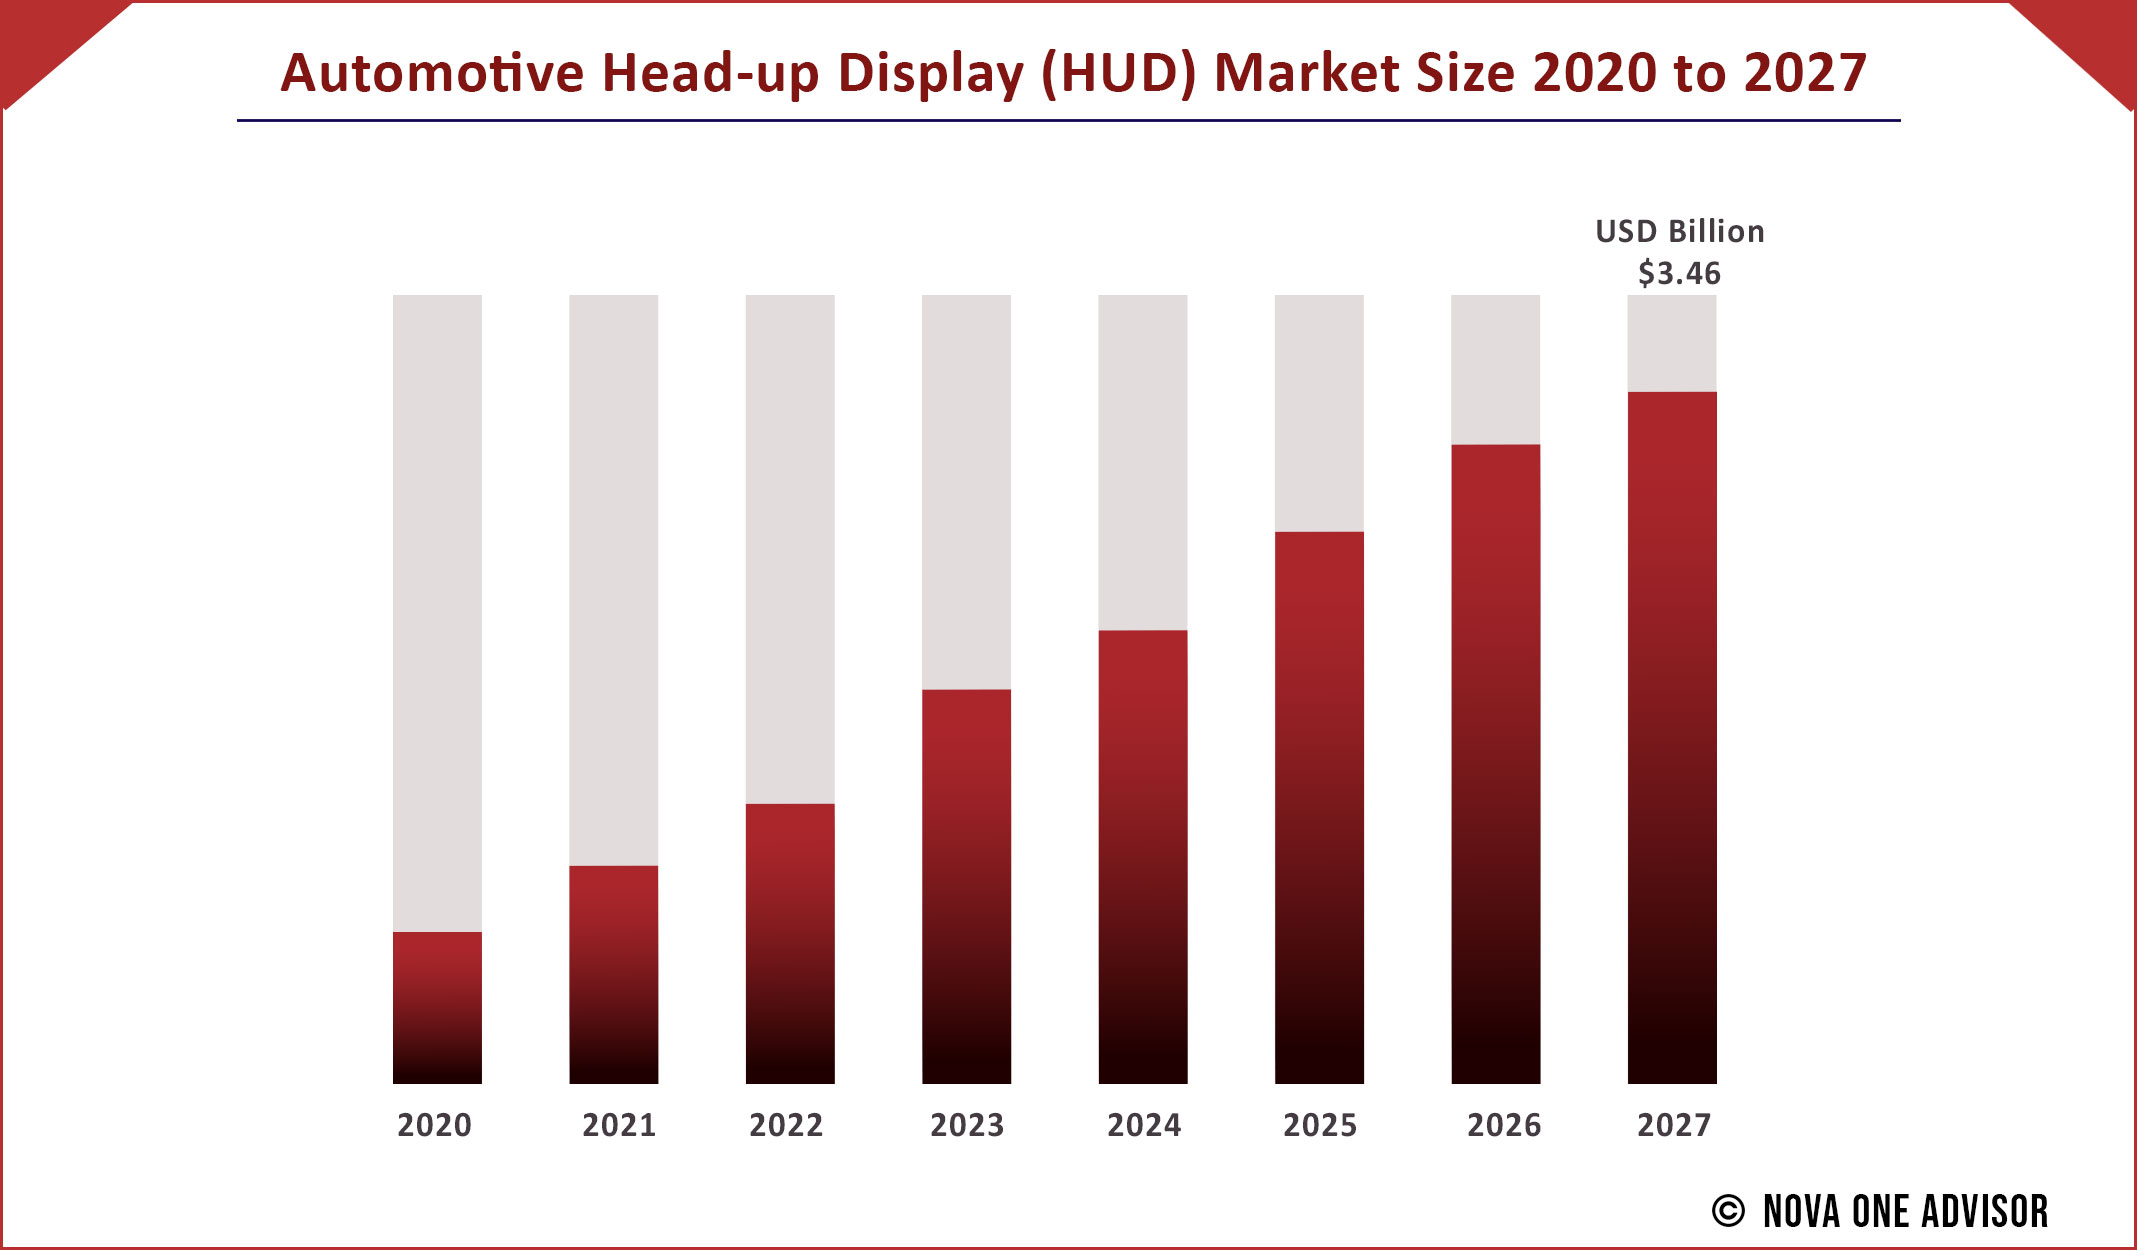 Automotive Head-up Display (HUD) Market Size 2020 to 2027